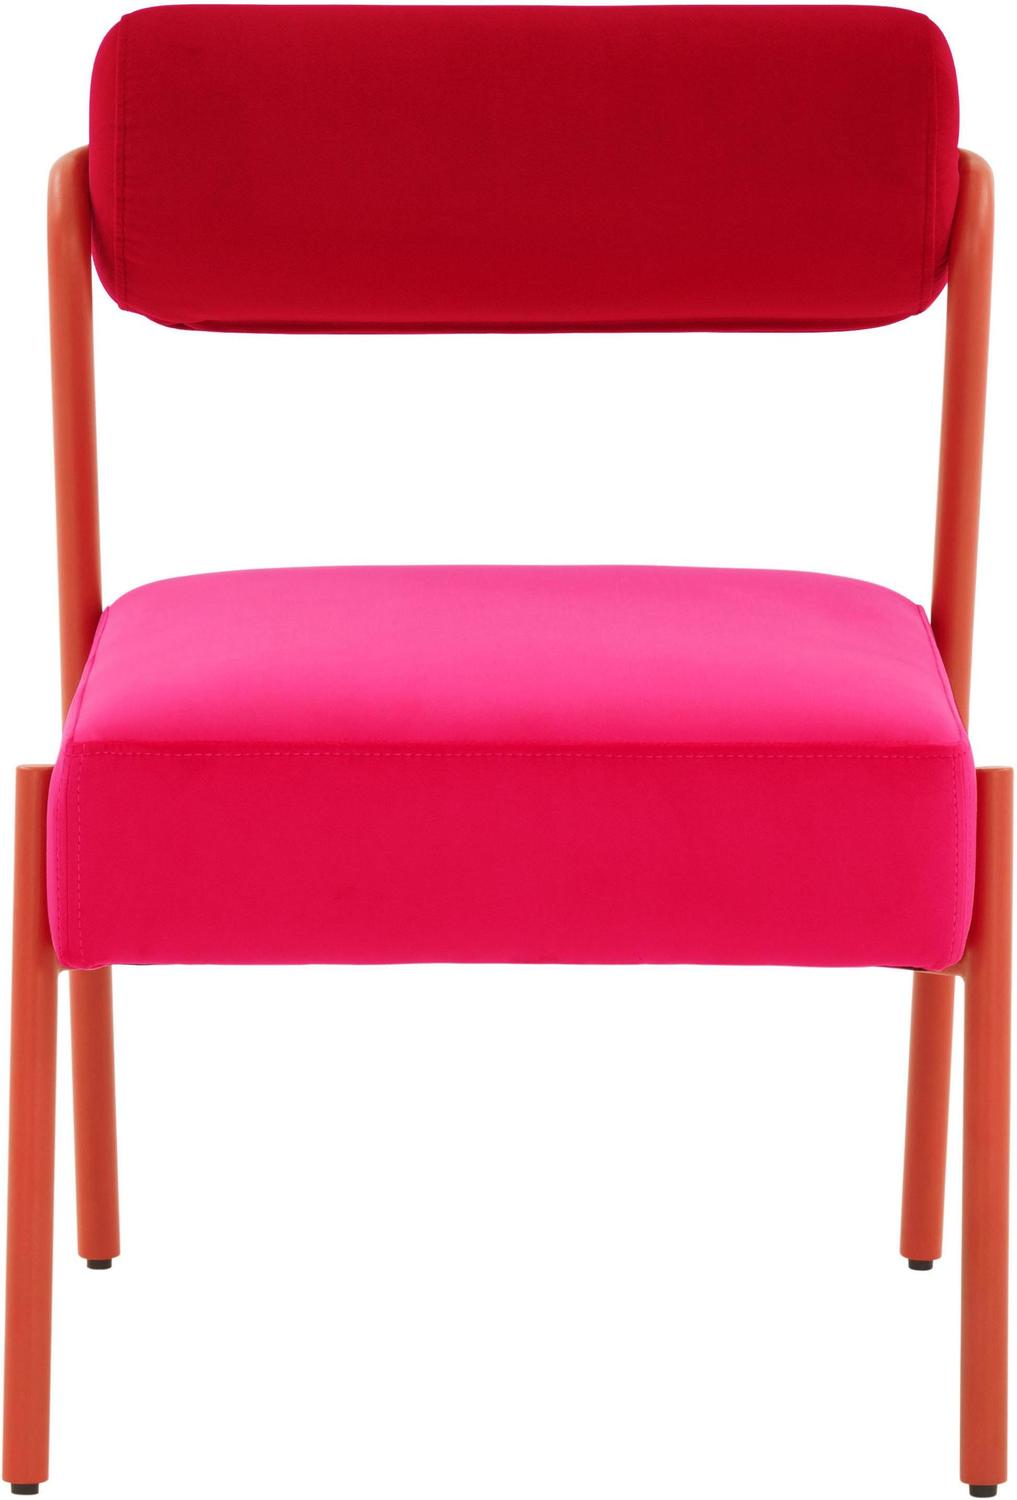 navy blue and white accent chair Tov Furniture Accent Chairs Pink